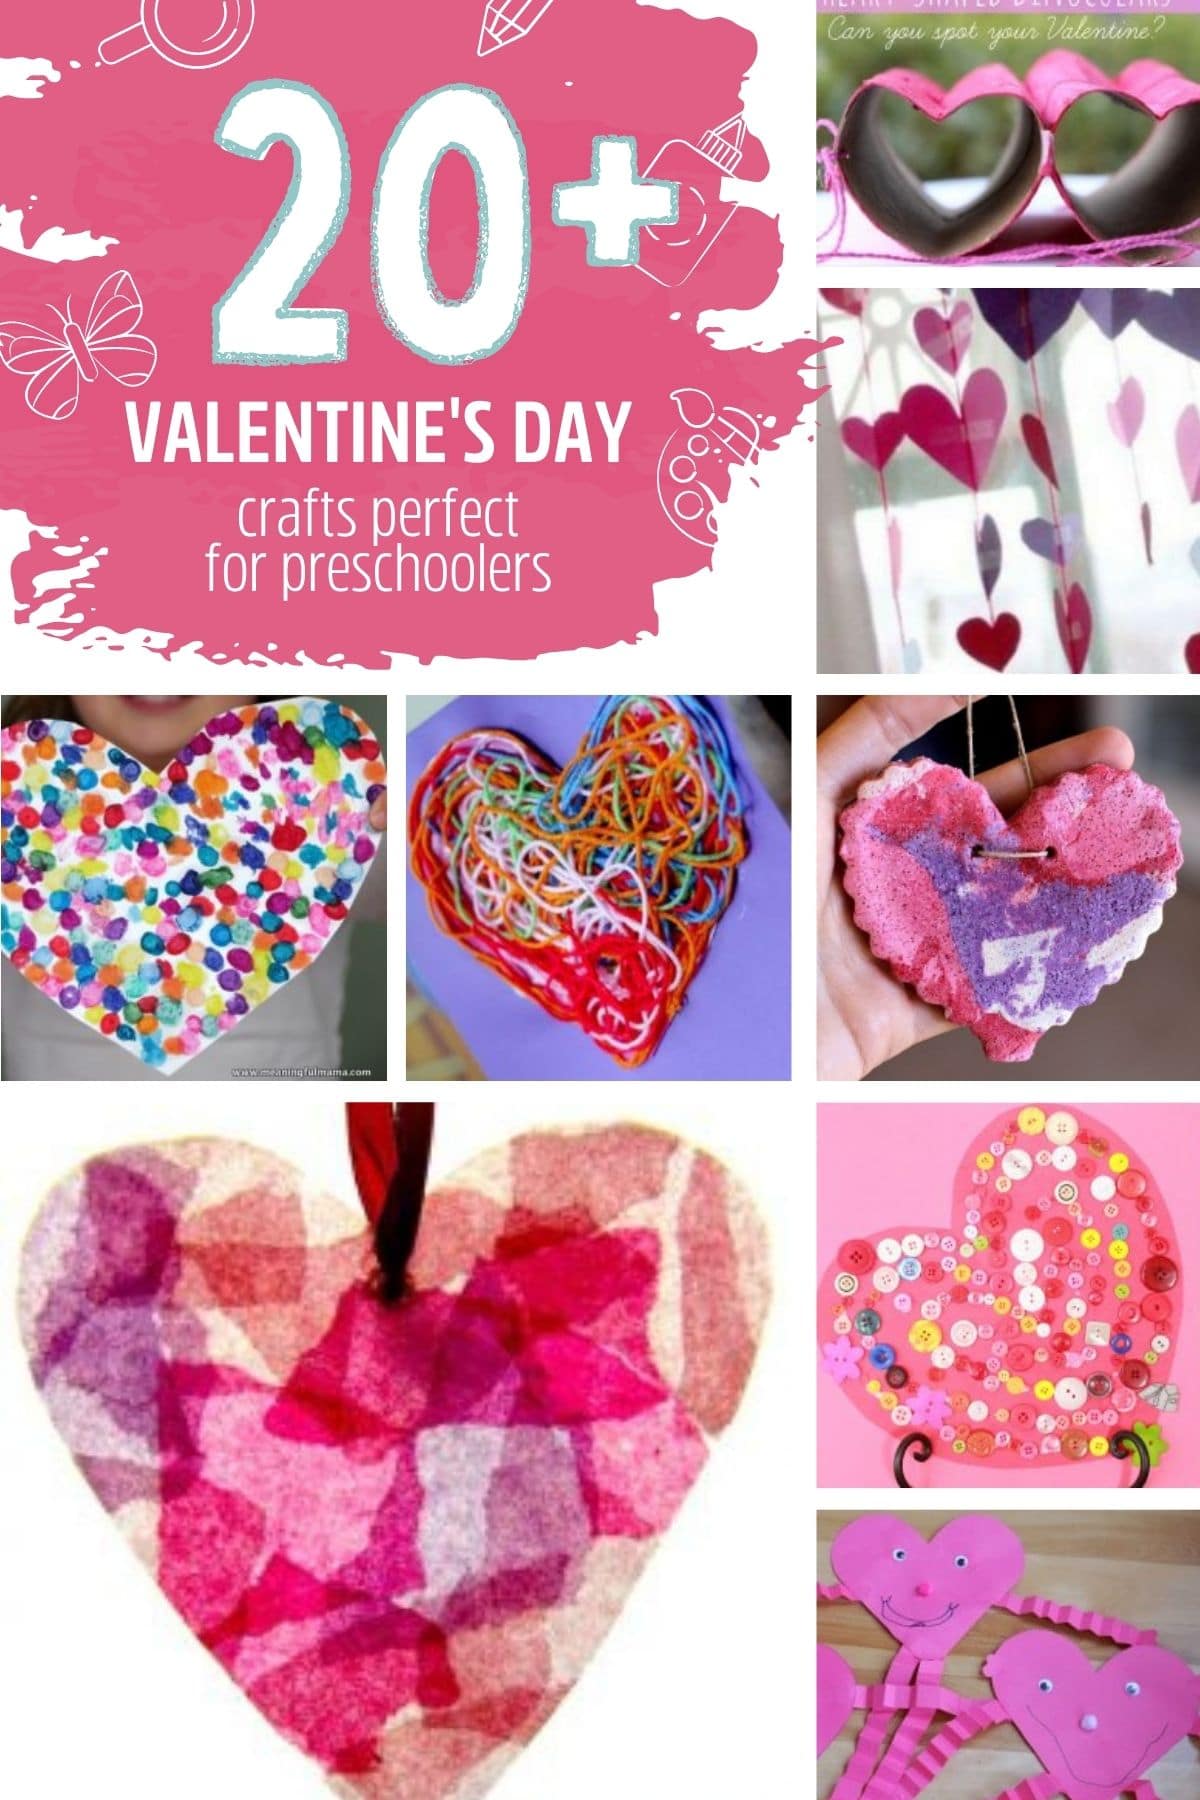 15 Valentine's Crafts for Teens That Are Actually Cool - Raising Teens Today